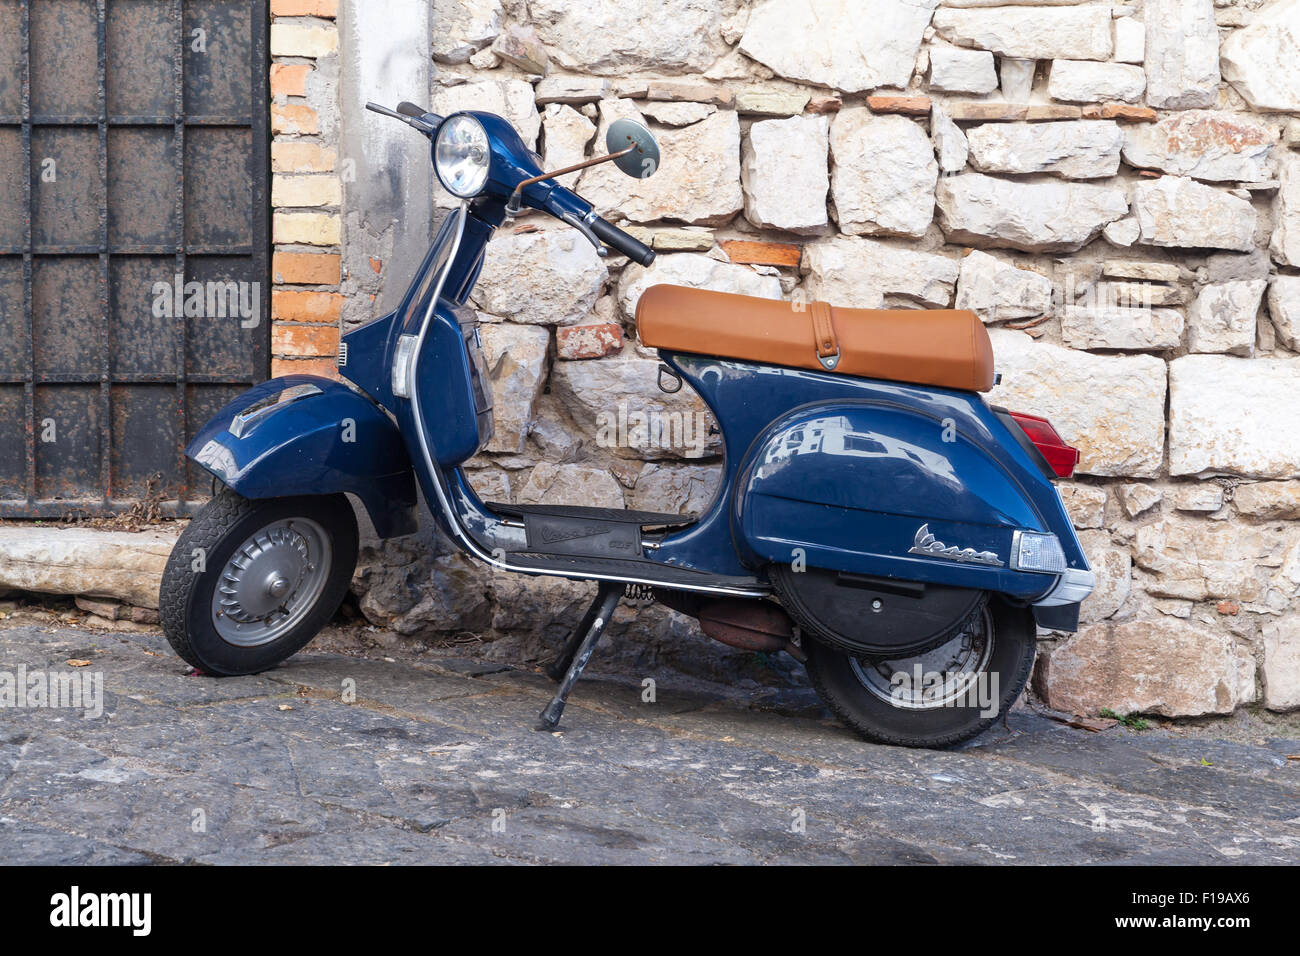 Gaeta, Italy - August 19, 2015: Classic blue Vespa PX 150 scooter stands parked in a town Stock Photo